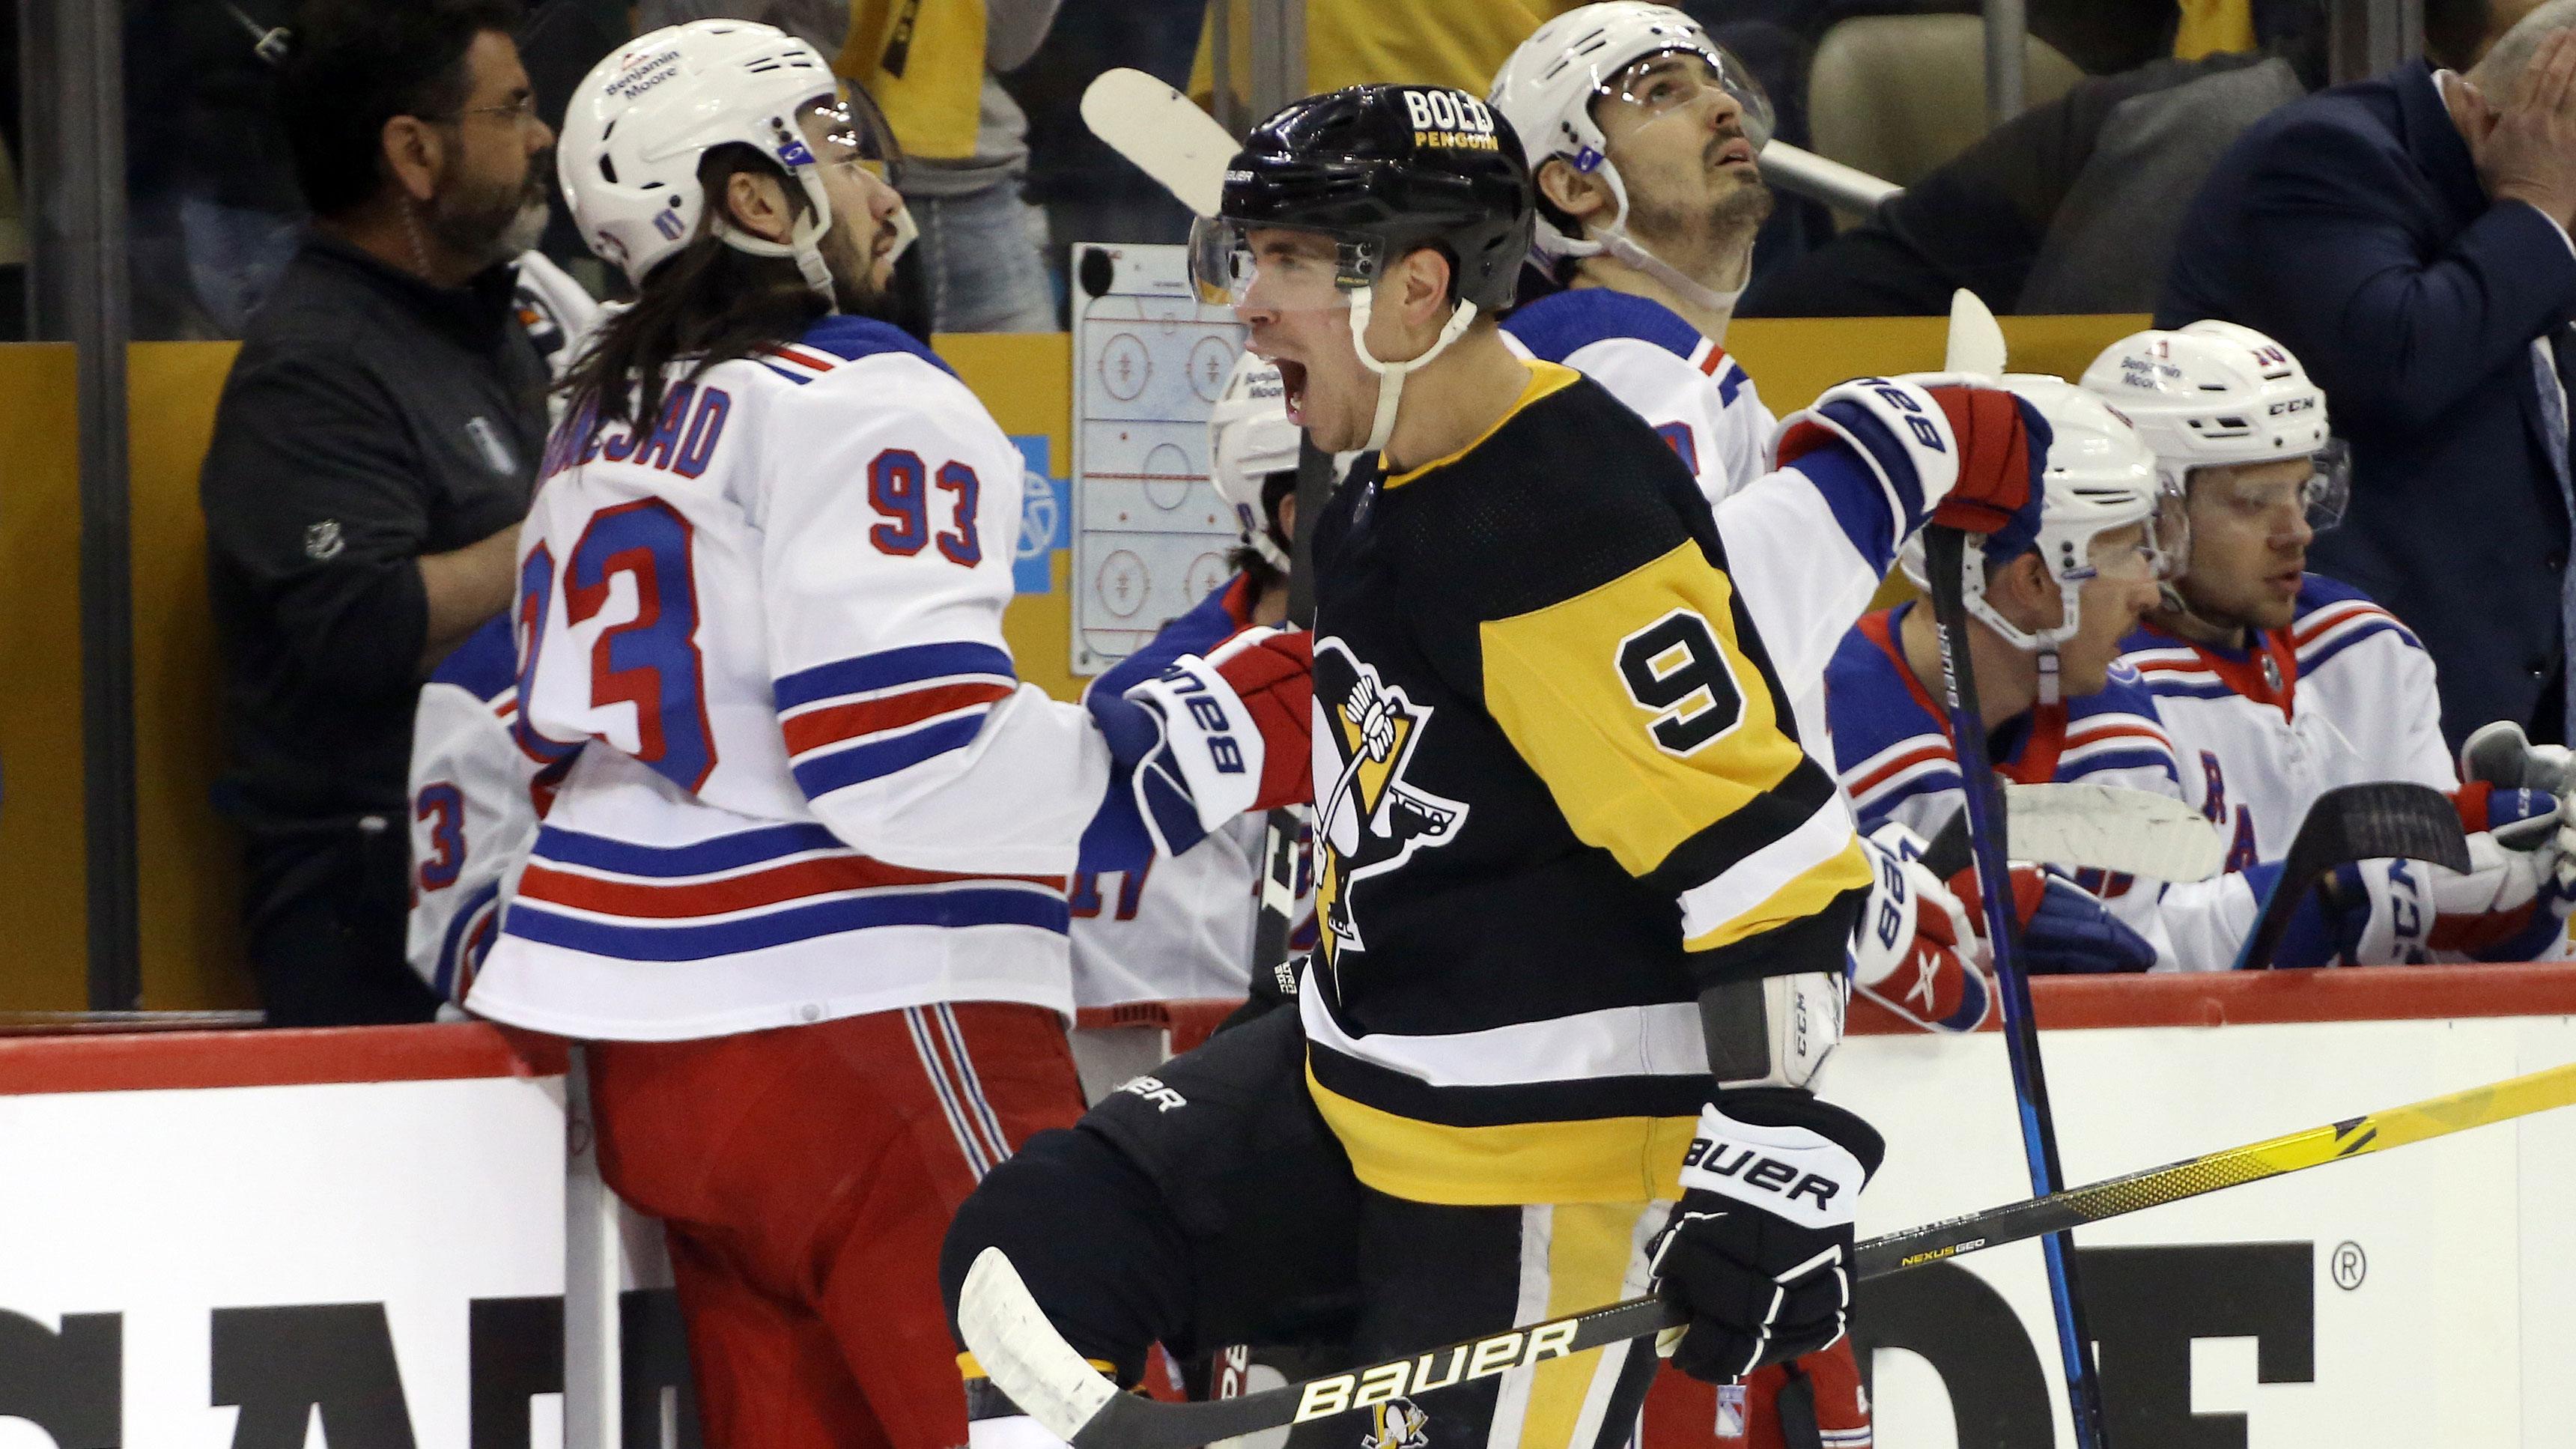 May 7, 2022; Pittsburgh, Pennsylvania, USA; Pittsburgh Penguins center Evan Rodrigues (9) reacts after scoring a goal against the New York Rangers during the first period in game three of the first round of the 2022 Stanley Cup Playoffs at PPG Paints Arena. / Charles LeClaire-USA TODAY Sports